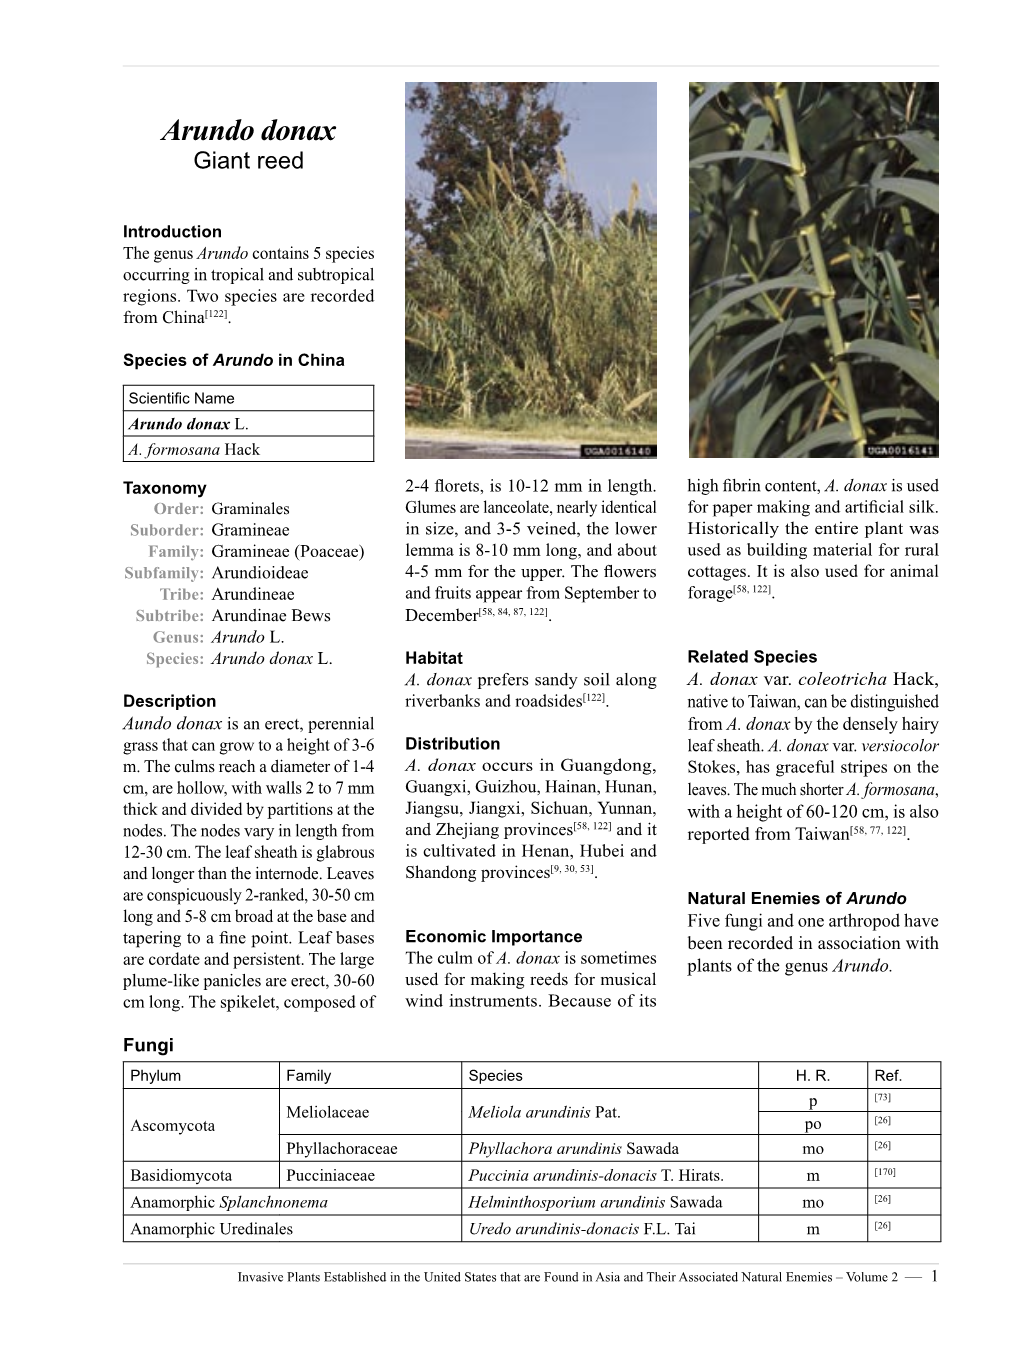 Invasive Plants Established in the United States That Are Found in Asia and Their Associated Natural Enemies – Volume 2 — 1 Arthropods Order Family Species H